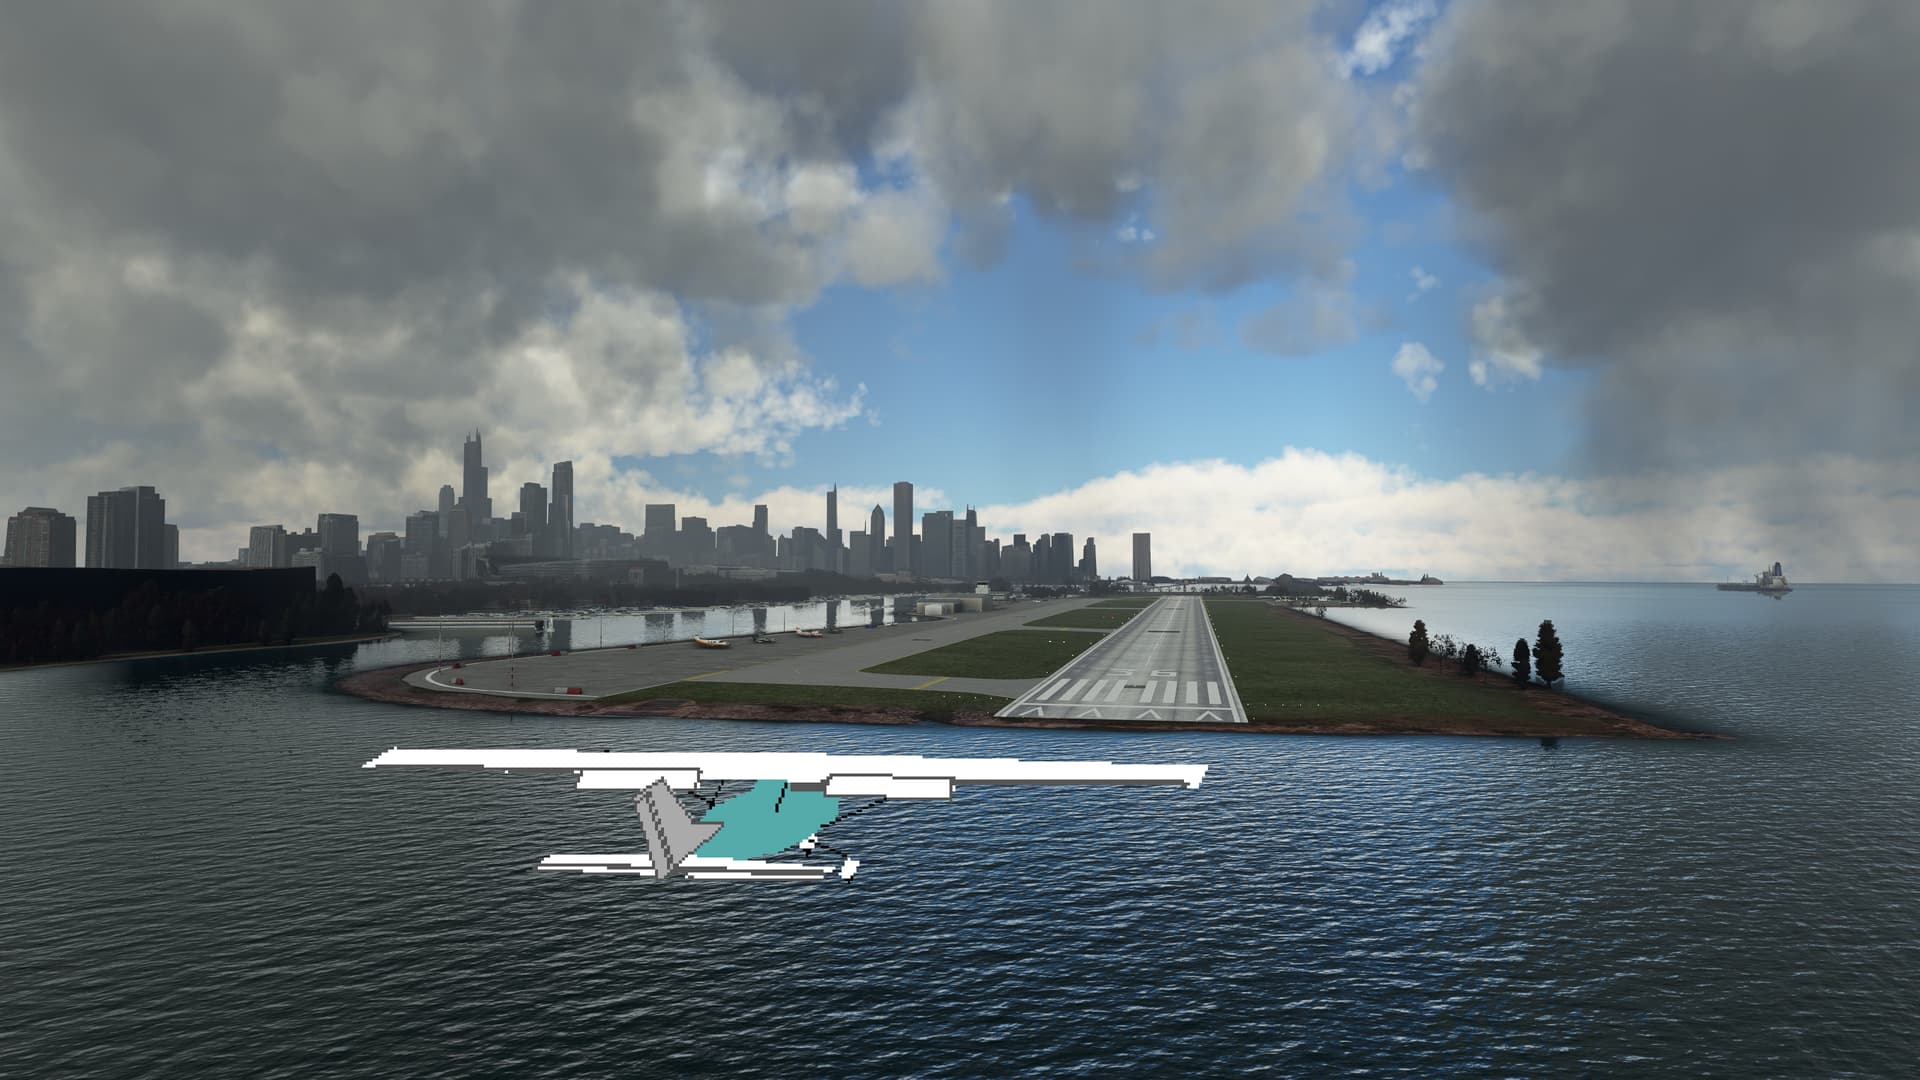 Microsoft Flight Simulator 40th Anniversary: Helicopters, Gliders, DHC-2,  DC-3 & Many More New Aircraft - Threshold